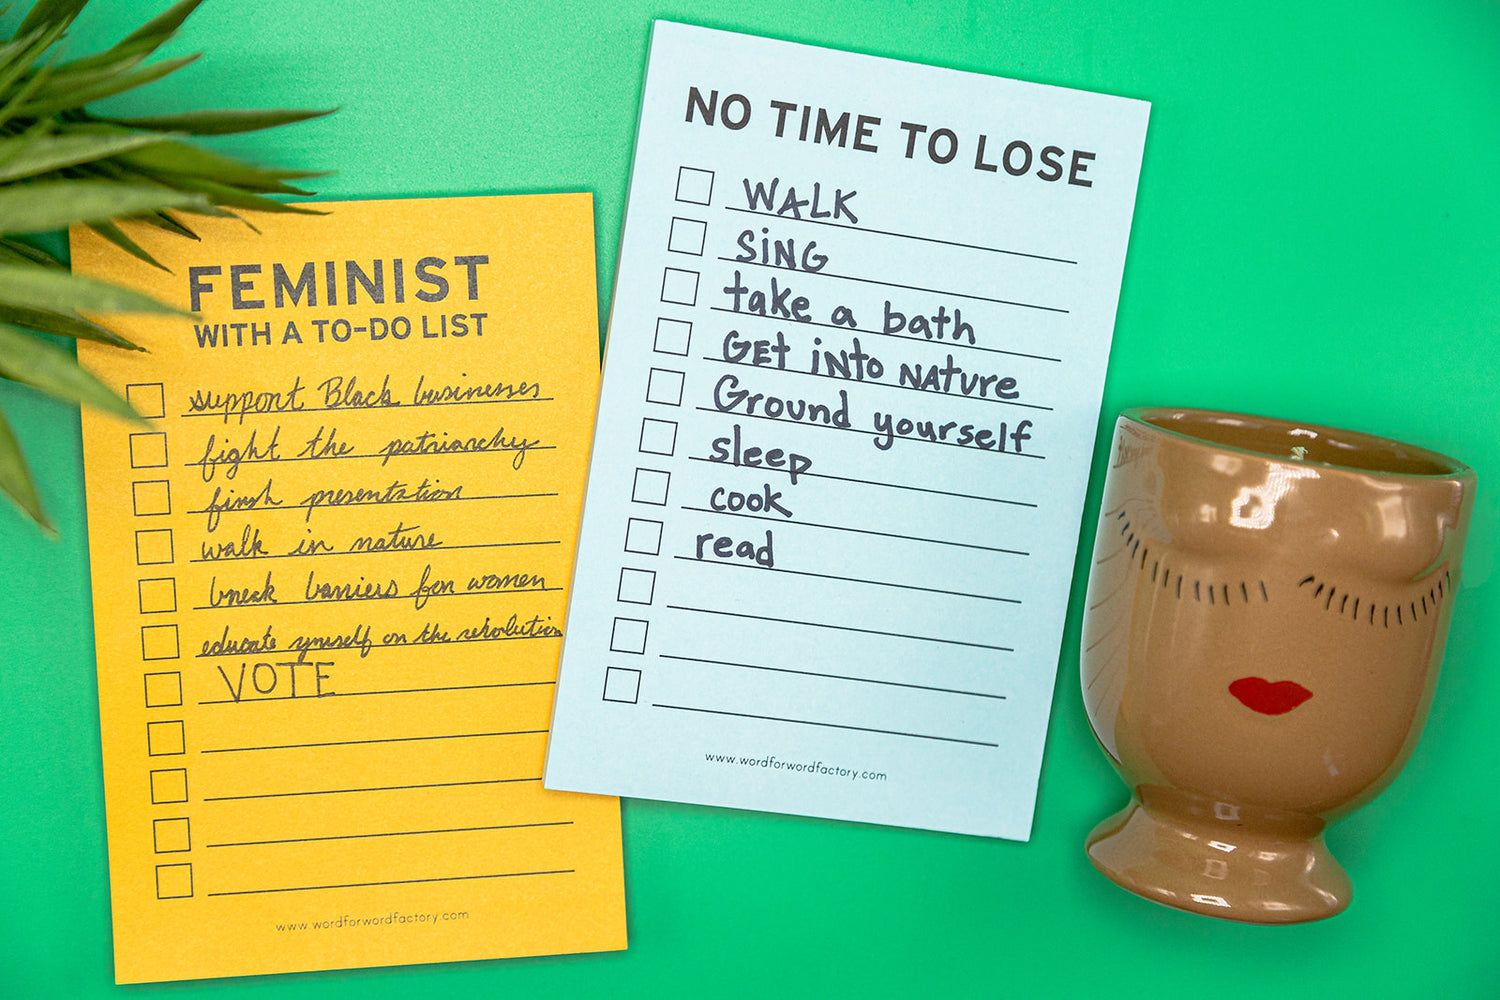 A gold notepad that said "Feminist with a to do list" a blue notepad that says "no time ot lose" and a clay mug with eyelashes and red lips